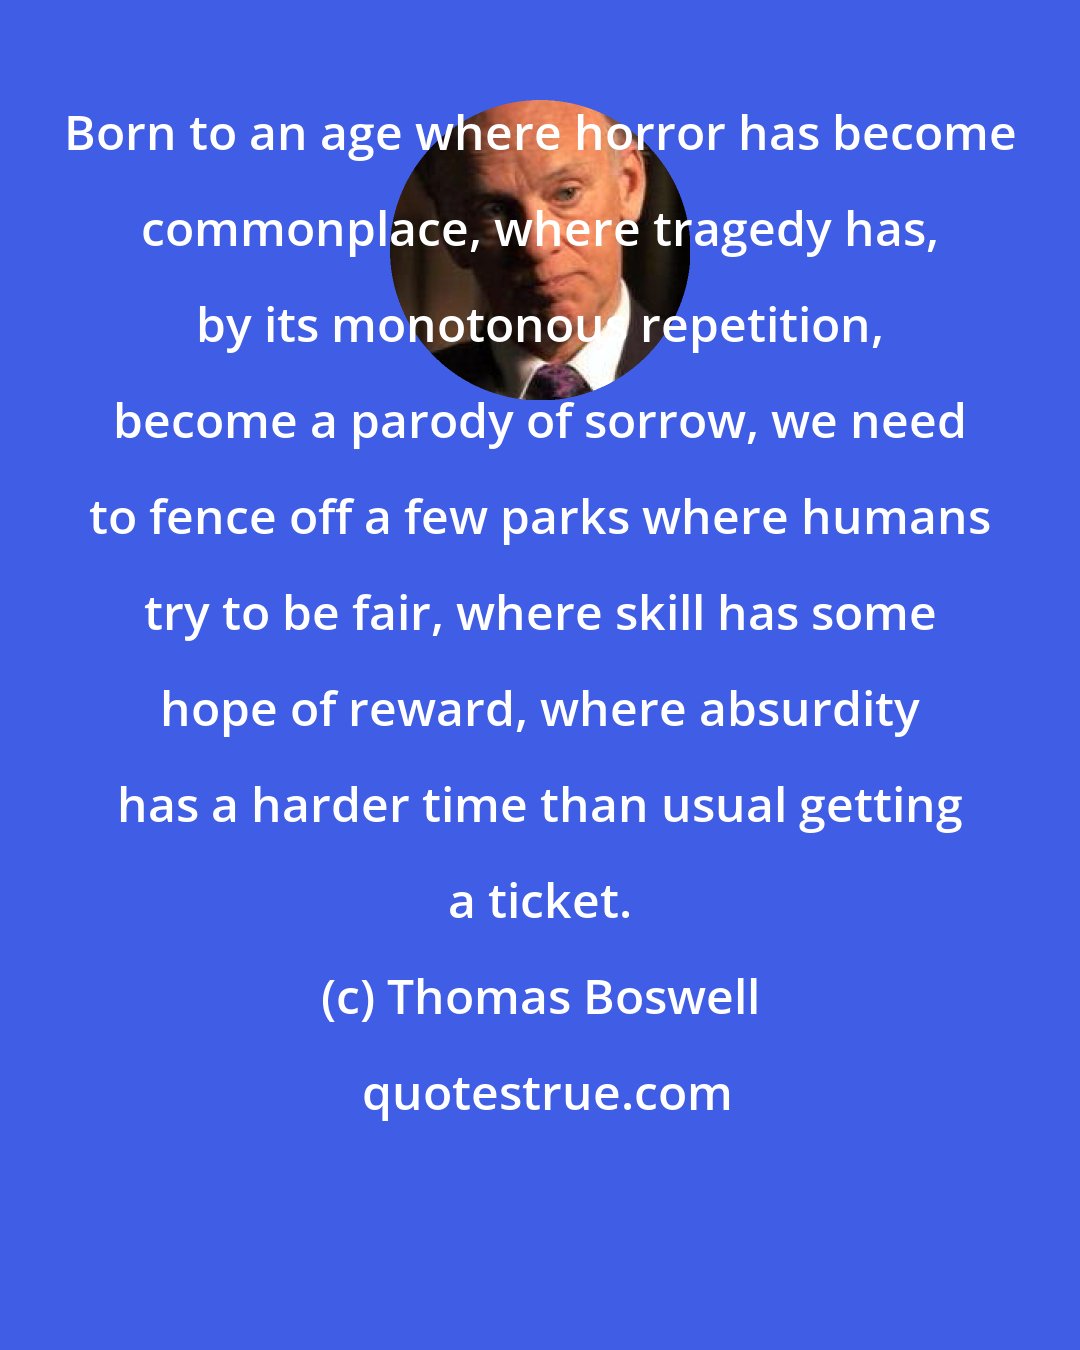 Thomas Boswell: Born to an age where horror has become commonplace, where tragedy has, by its monotonous repetition, become a parody of sorrow, we need to fence off a few parks where humans try to be fair, where skill has some hope of reward, where absurdity has a harder time than usual getting a ticket.